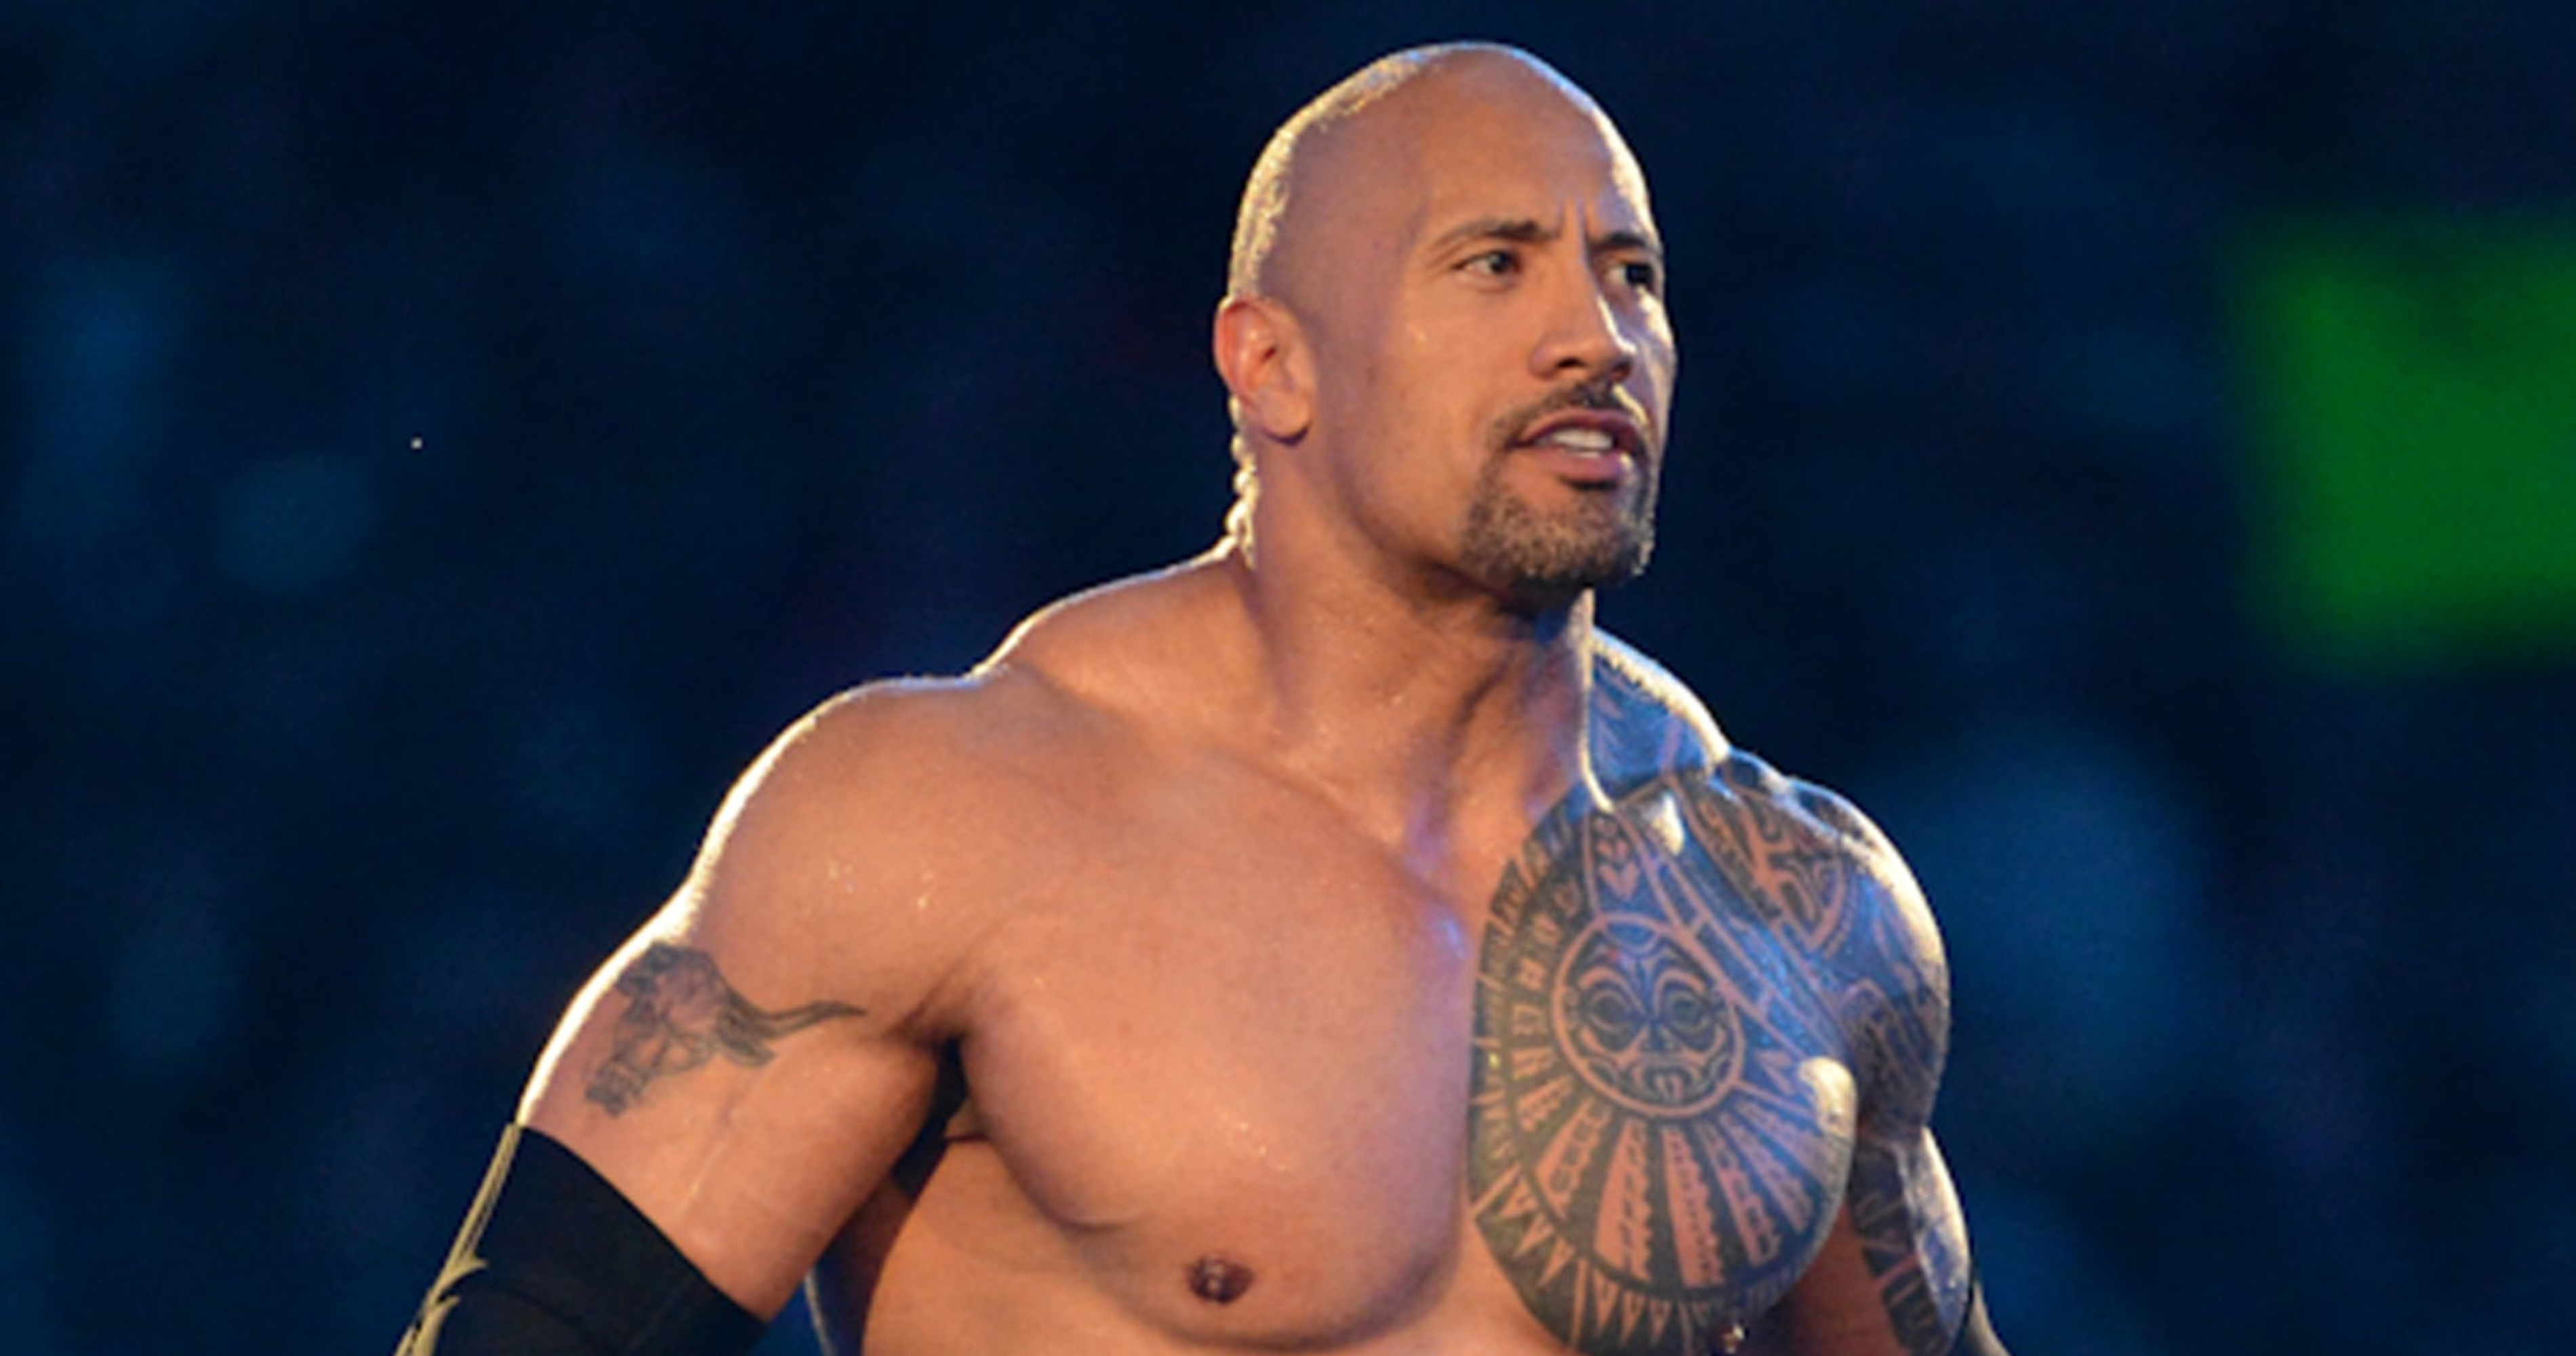 WWE Superstars and their tattoos